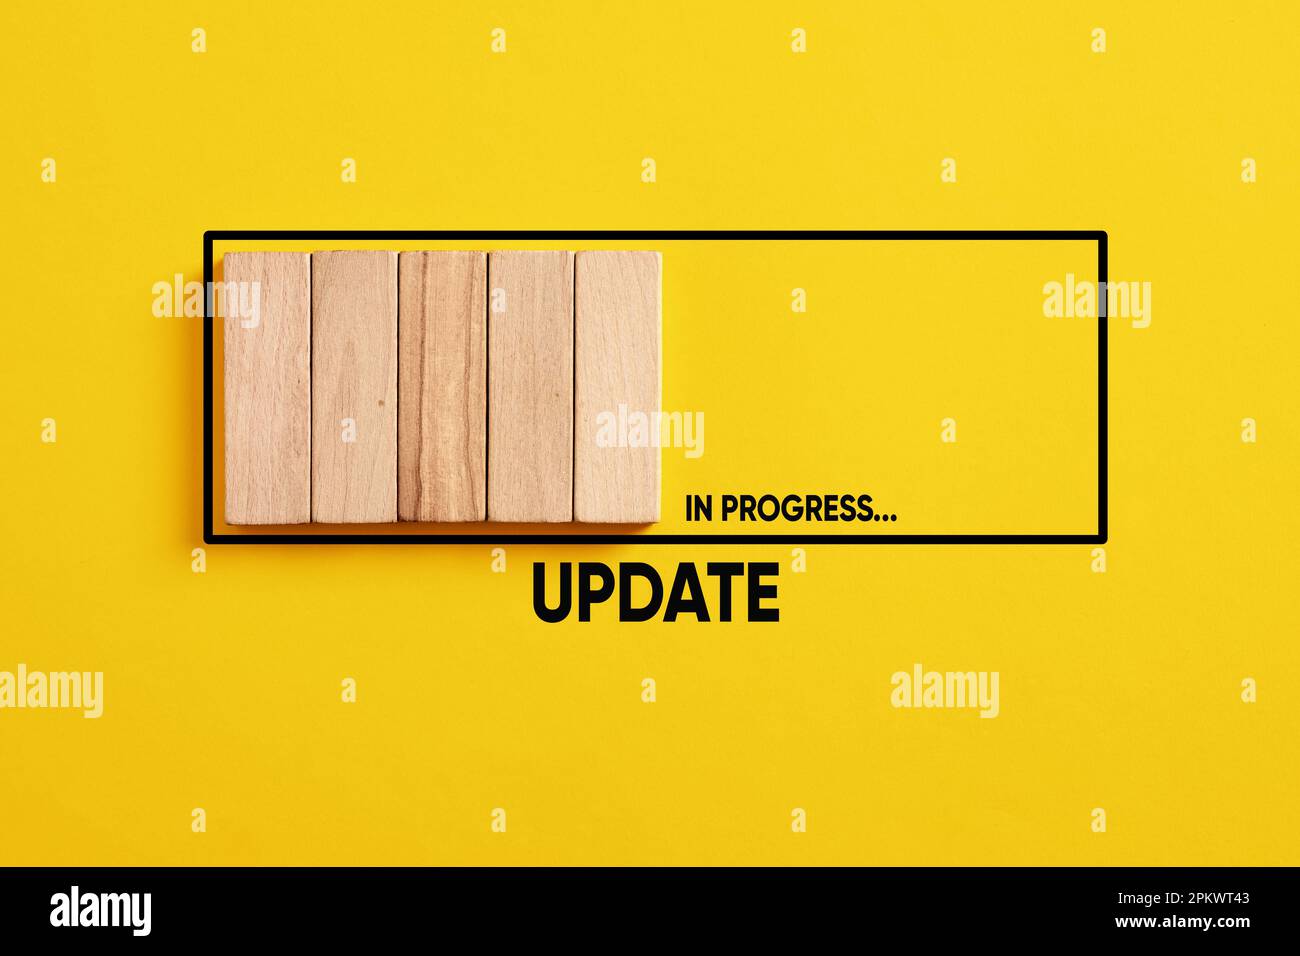 Downloading and installing updates or upgrading technology concept. Update loading in progress bar on yellow background. Stock Photo